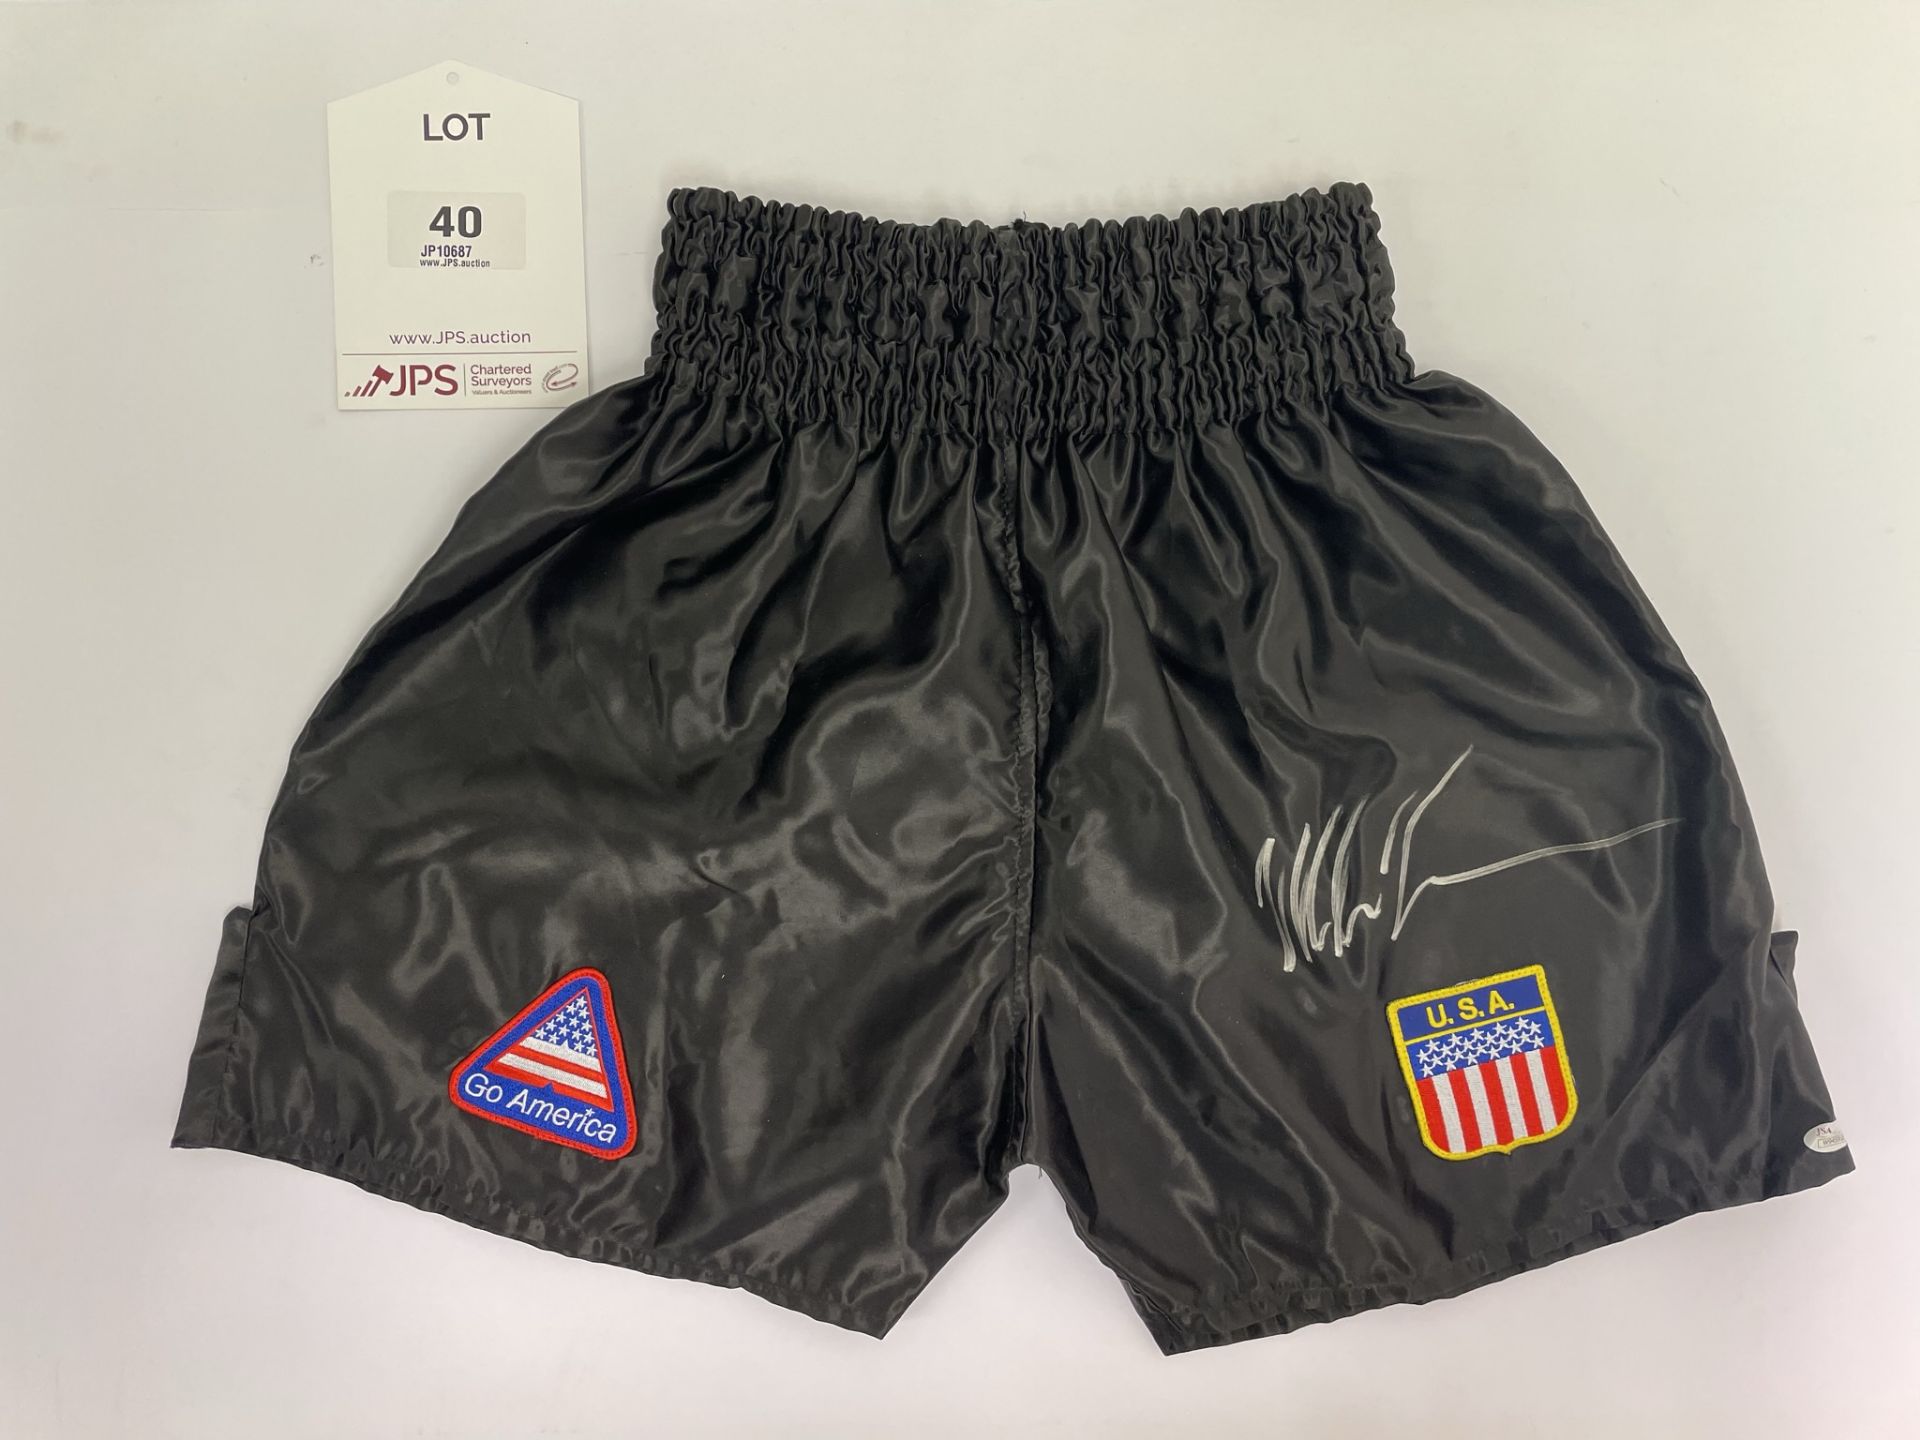 Mike Tyson Signed Boxing Trunks - Please see last image for verification